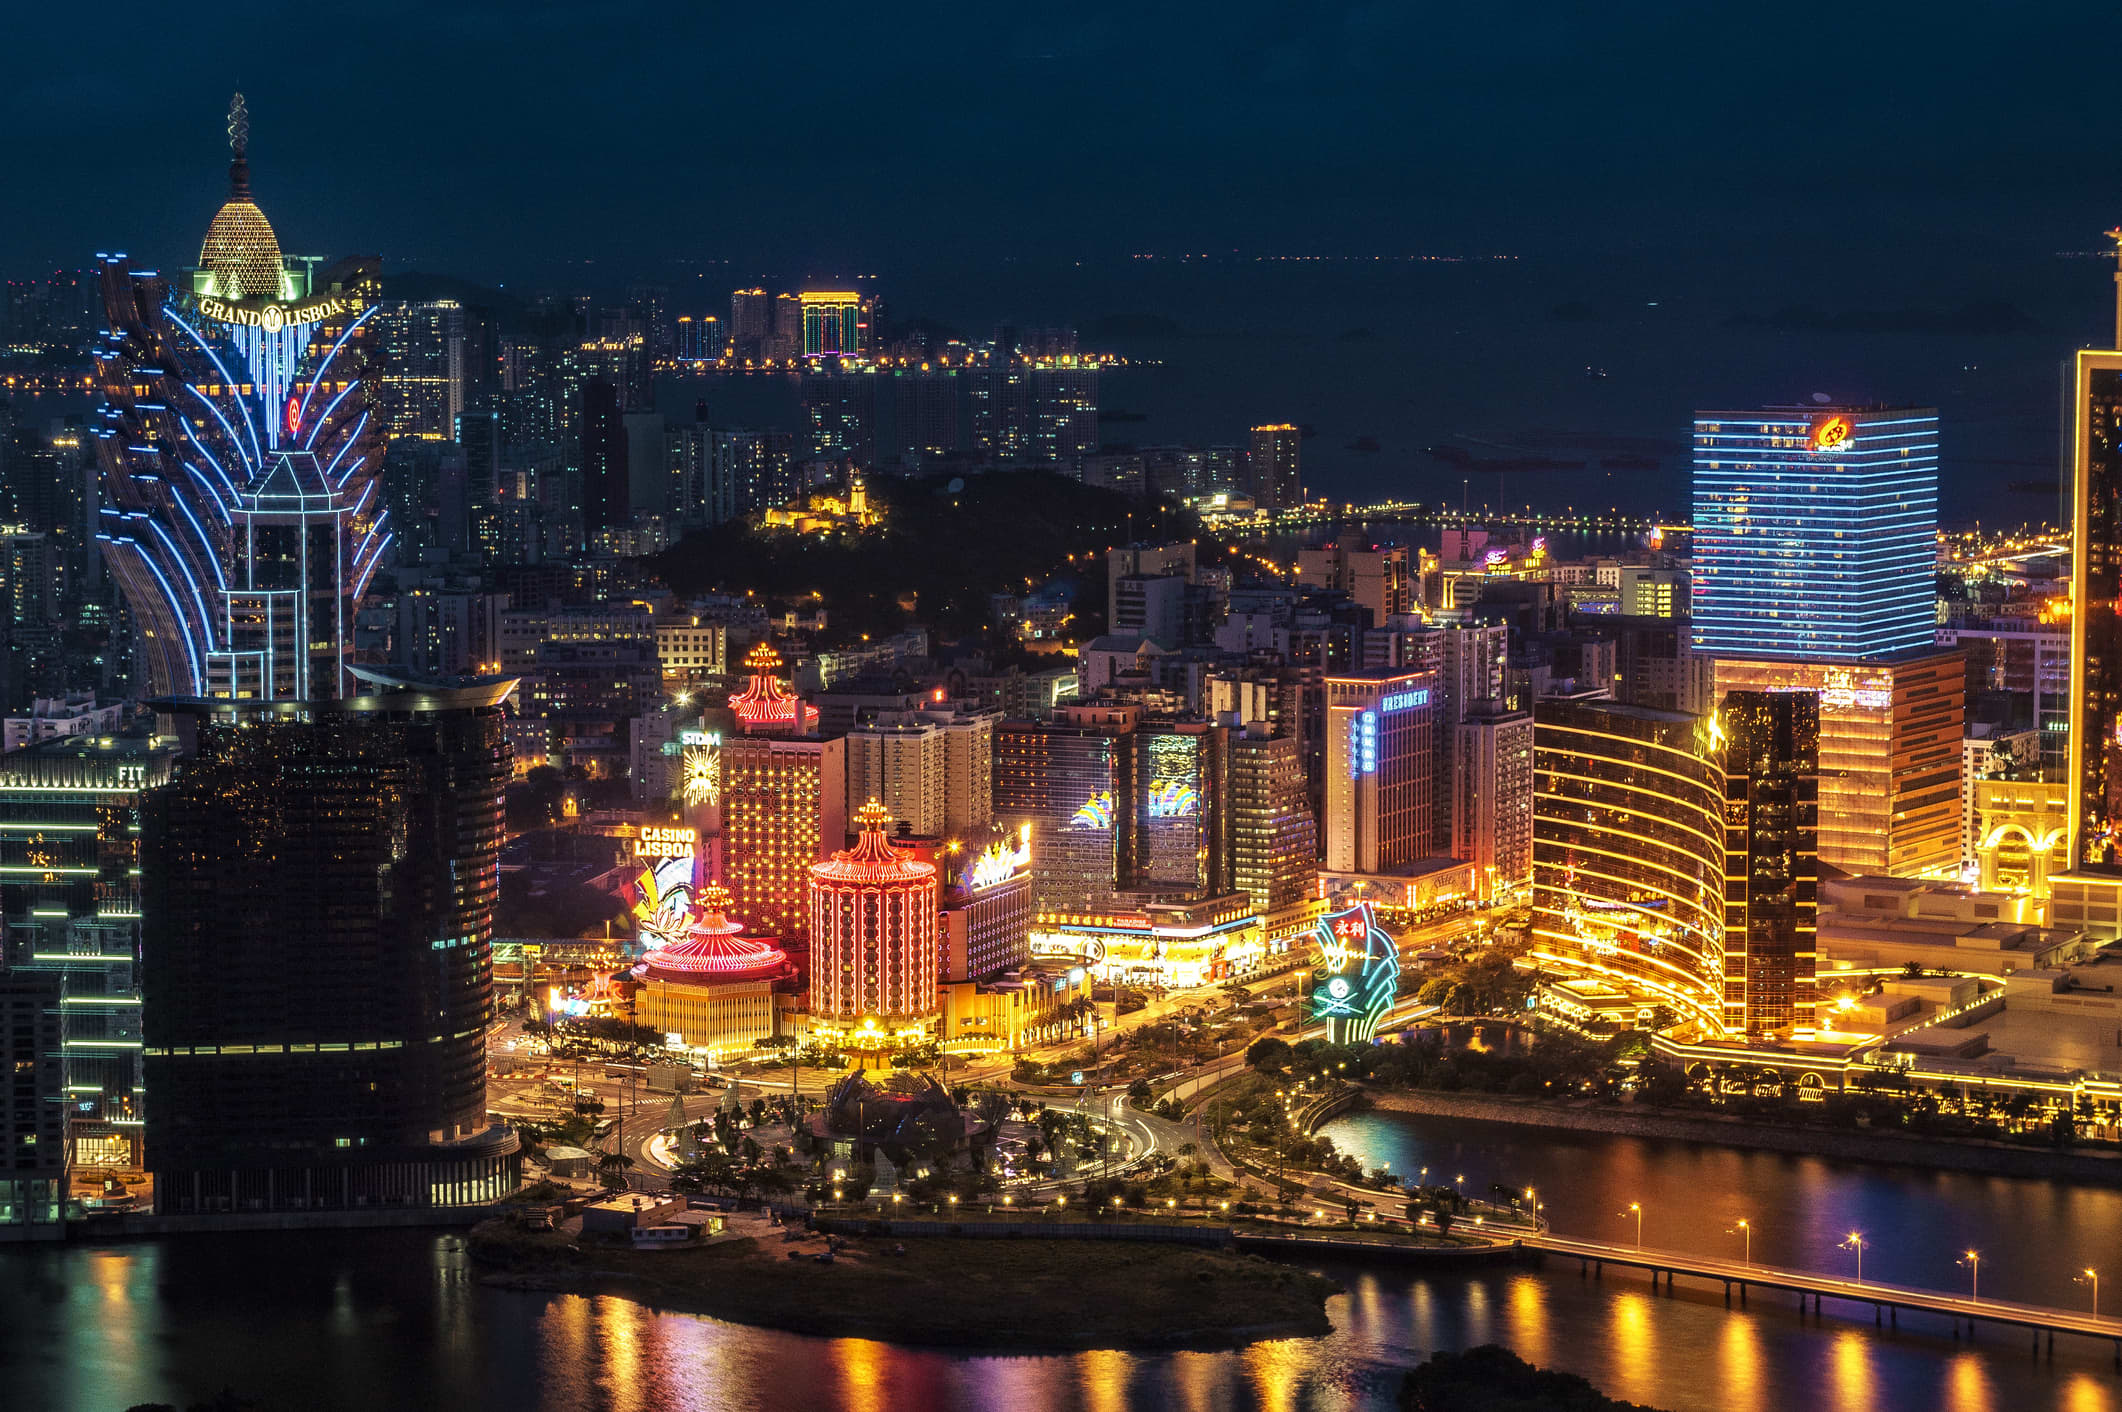 Jefferies says these casino stocks have less upside as they better reflect Macao's recovery